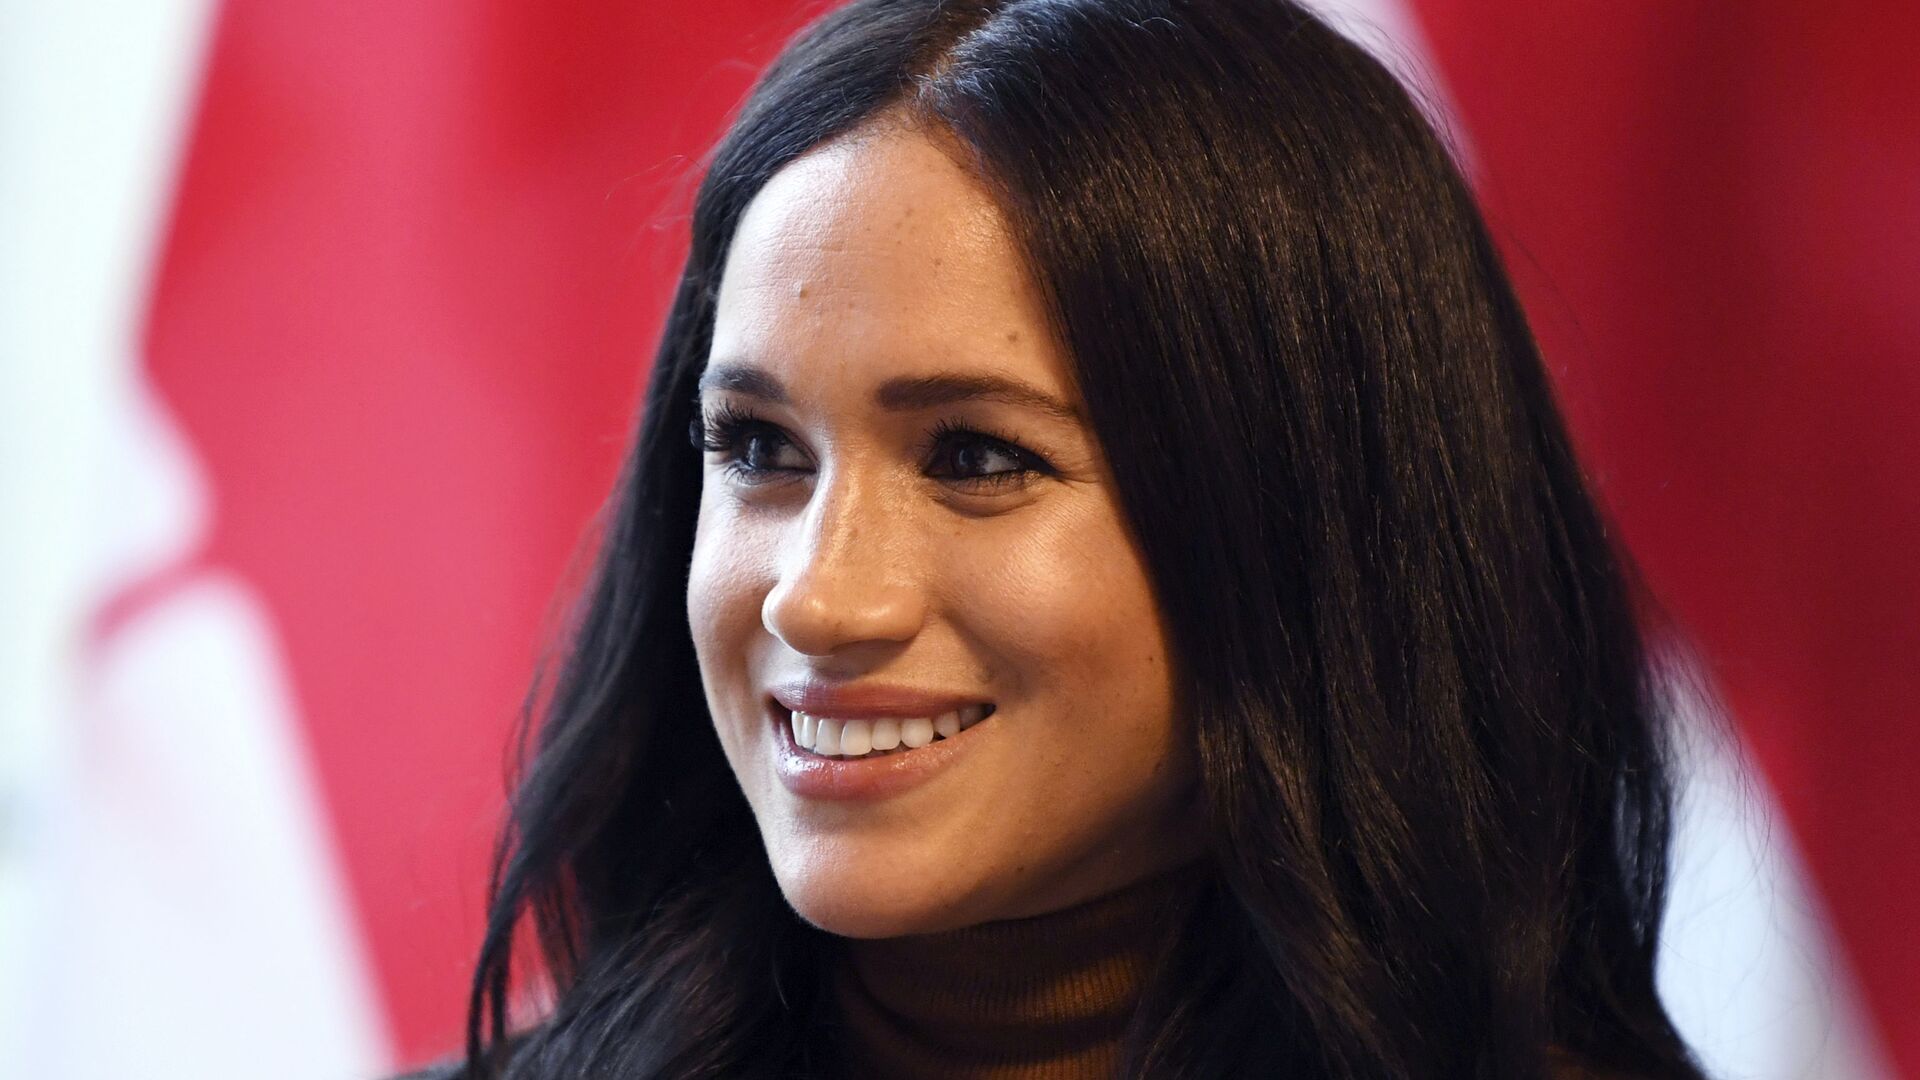 In this Tuesday, Jan. 7, 2020 file photo, Meghan, Duchess of Sussex smiles during her visit with Prince Harry to Canada House, in London - Sputnik International, 1920, 02.05.2022